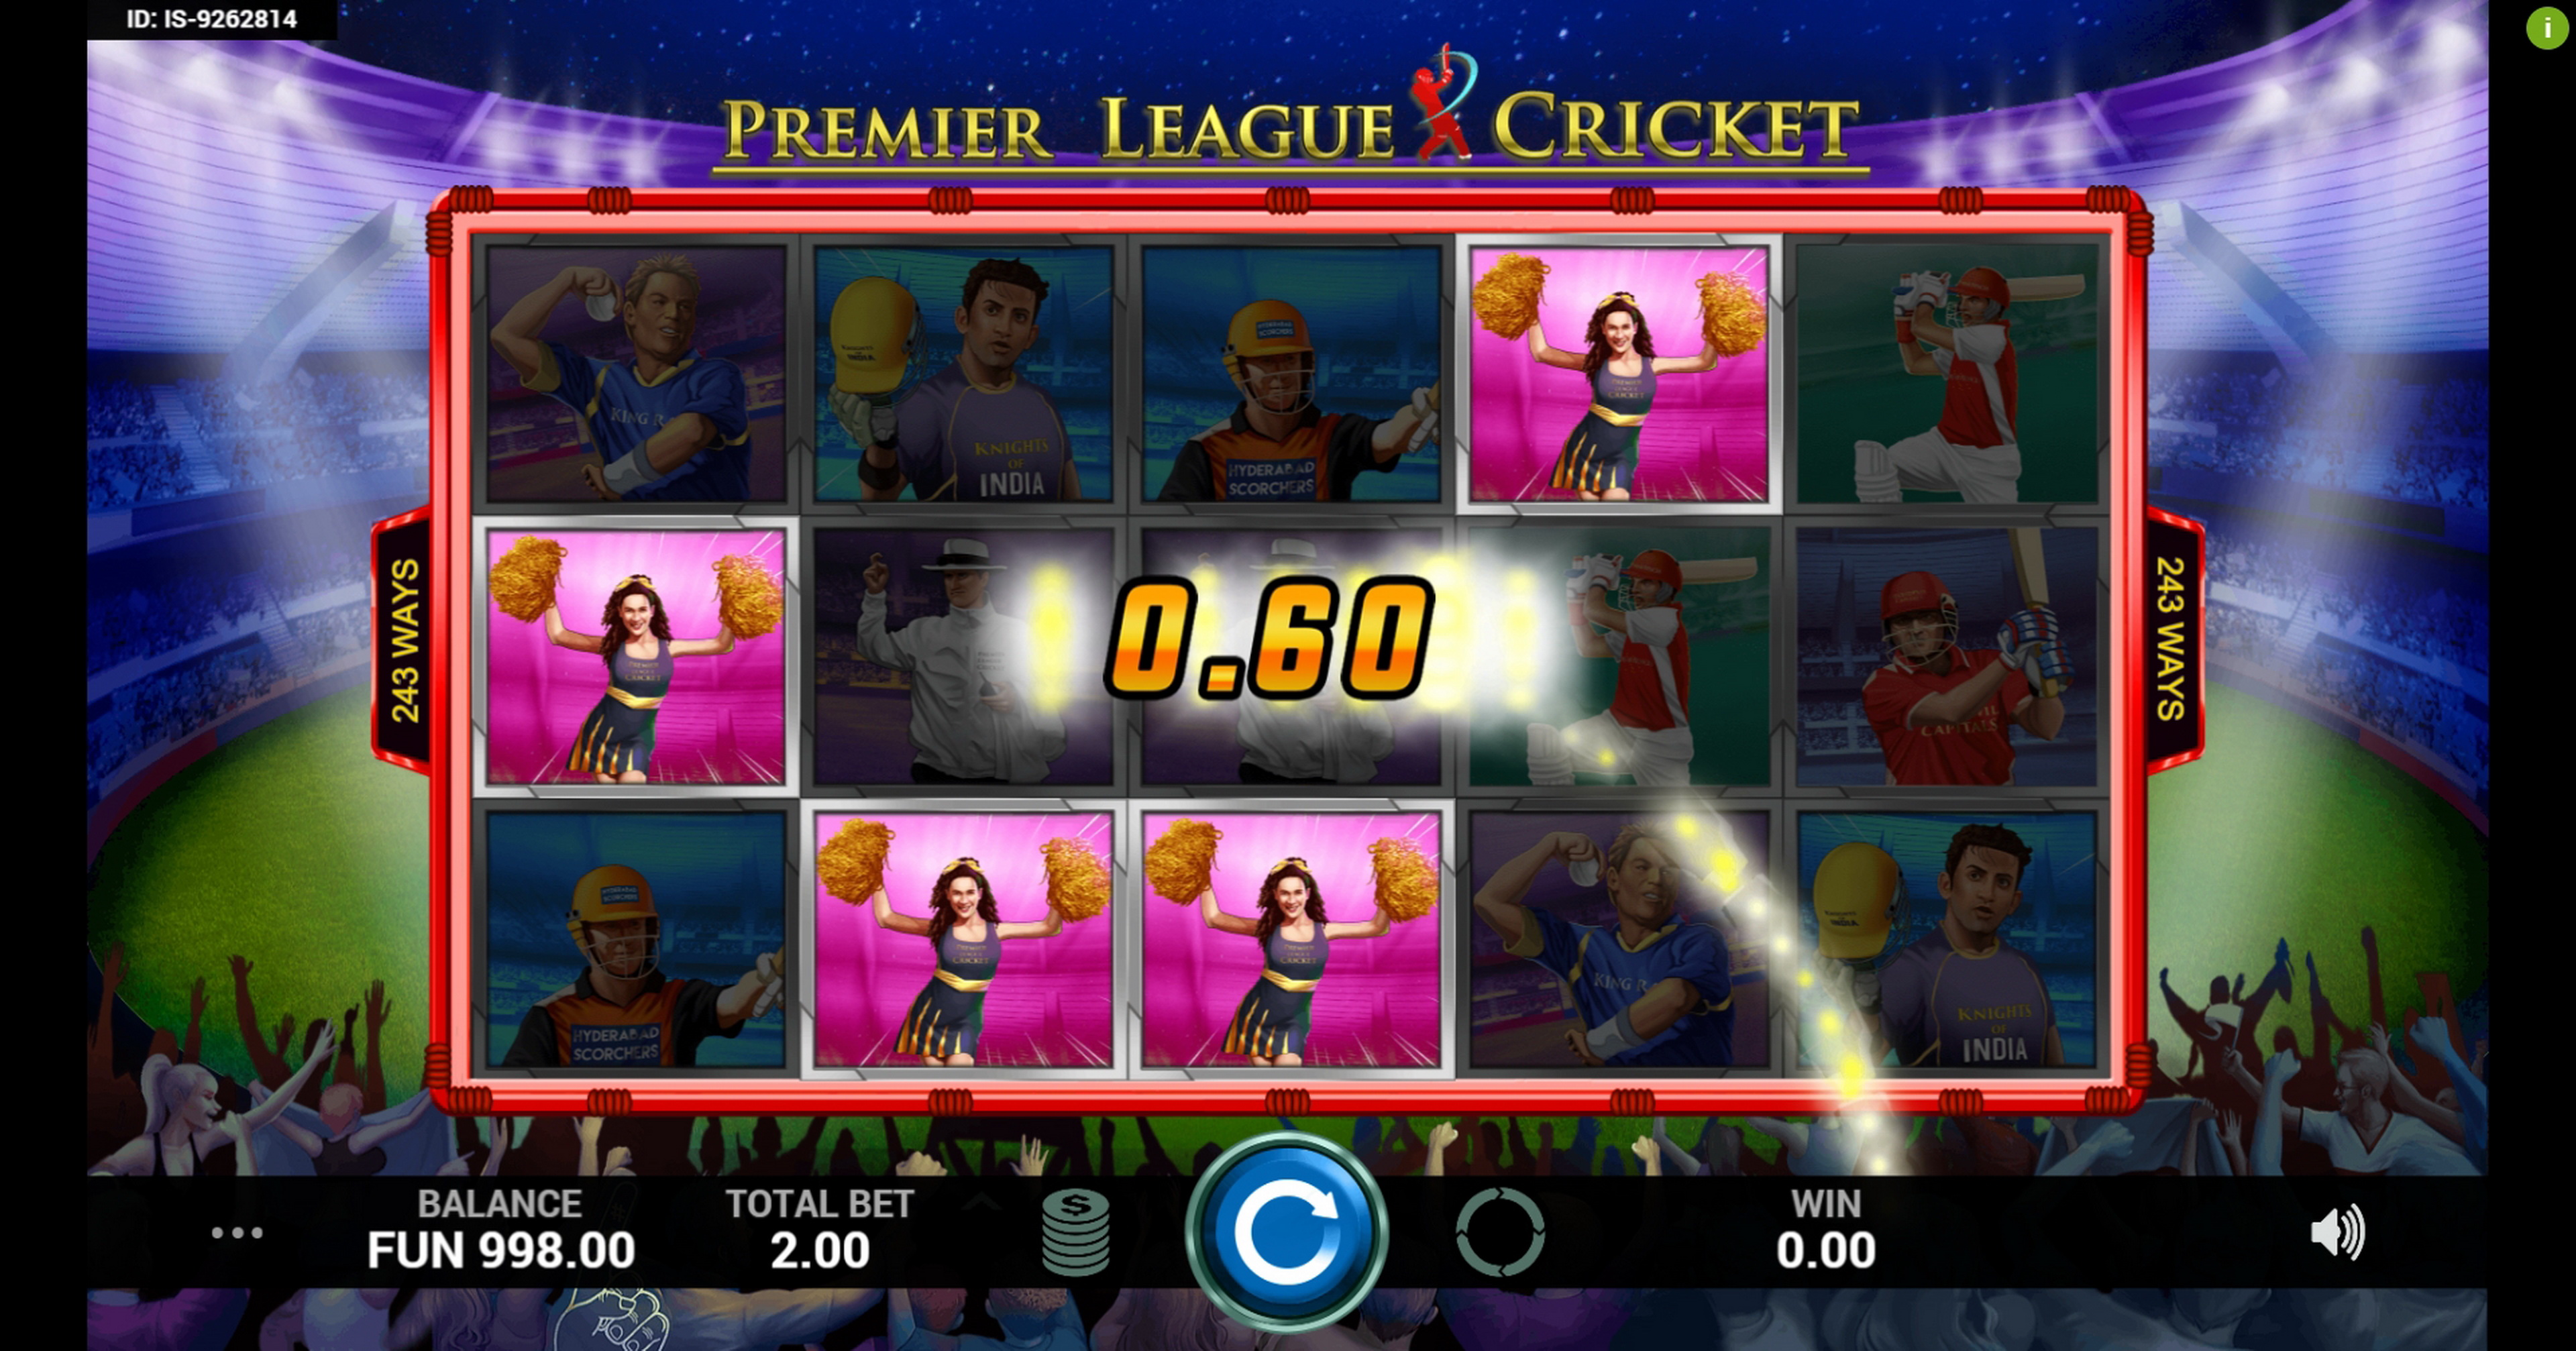 Win Money in Premier League Cricket Free Slot Game by Indi Slots